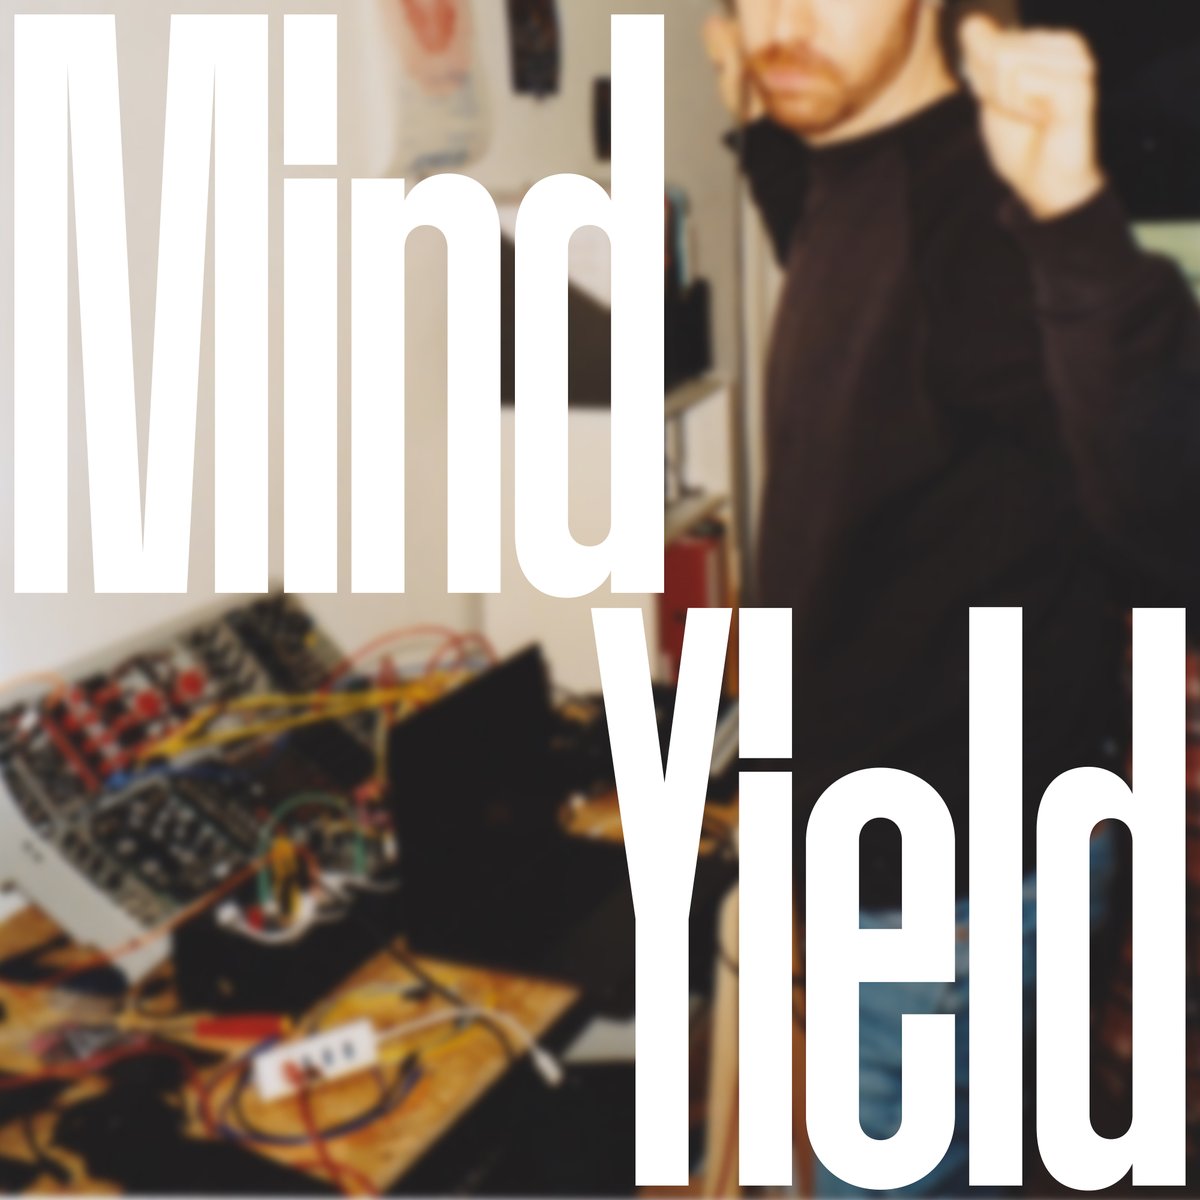 Today, i release 'Mind Yield', a track i produced this fall while dreaming of the summer bouncy dancefloor. It's an incentive to not yield our minds to the surrounding crazy world. Hope you like it 💛 LISTEN HERE -> listen.mouthwateringrecords.com/ArthurHnatek_M…